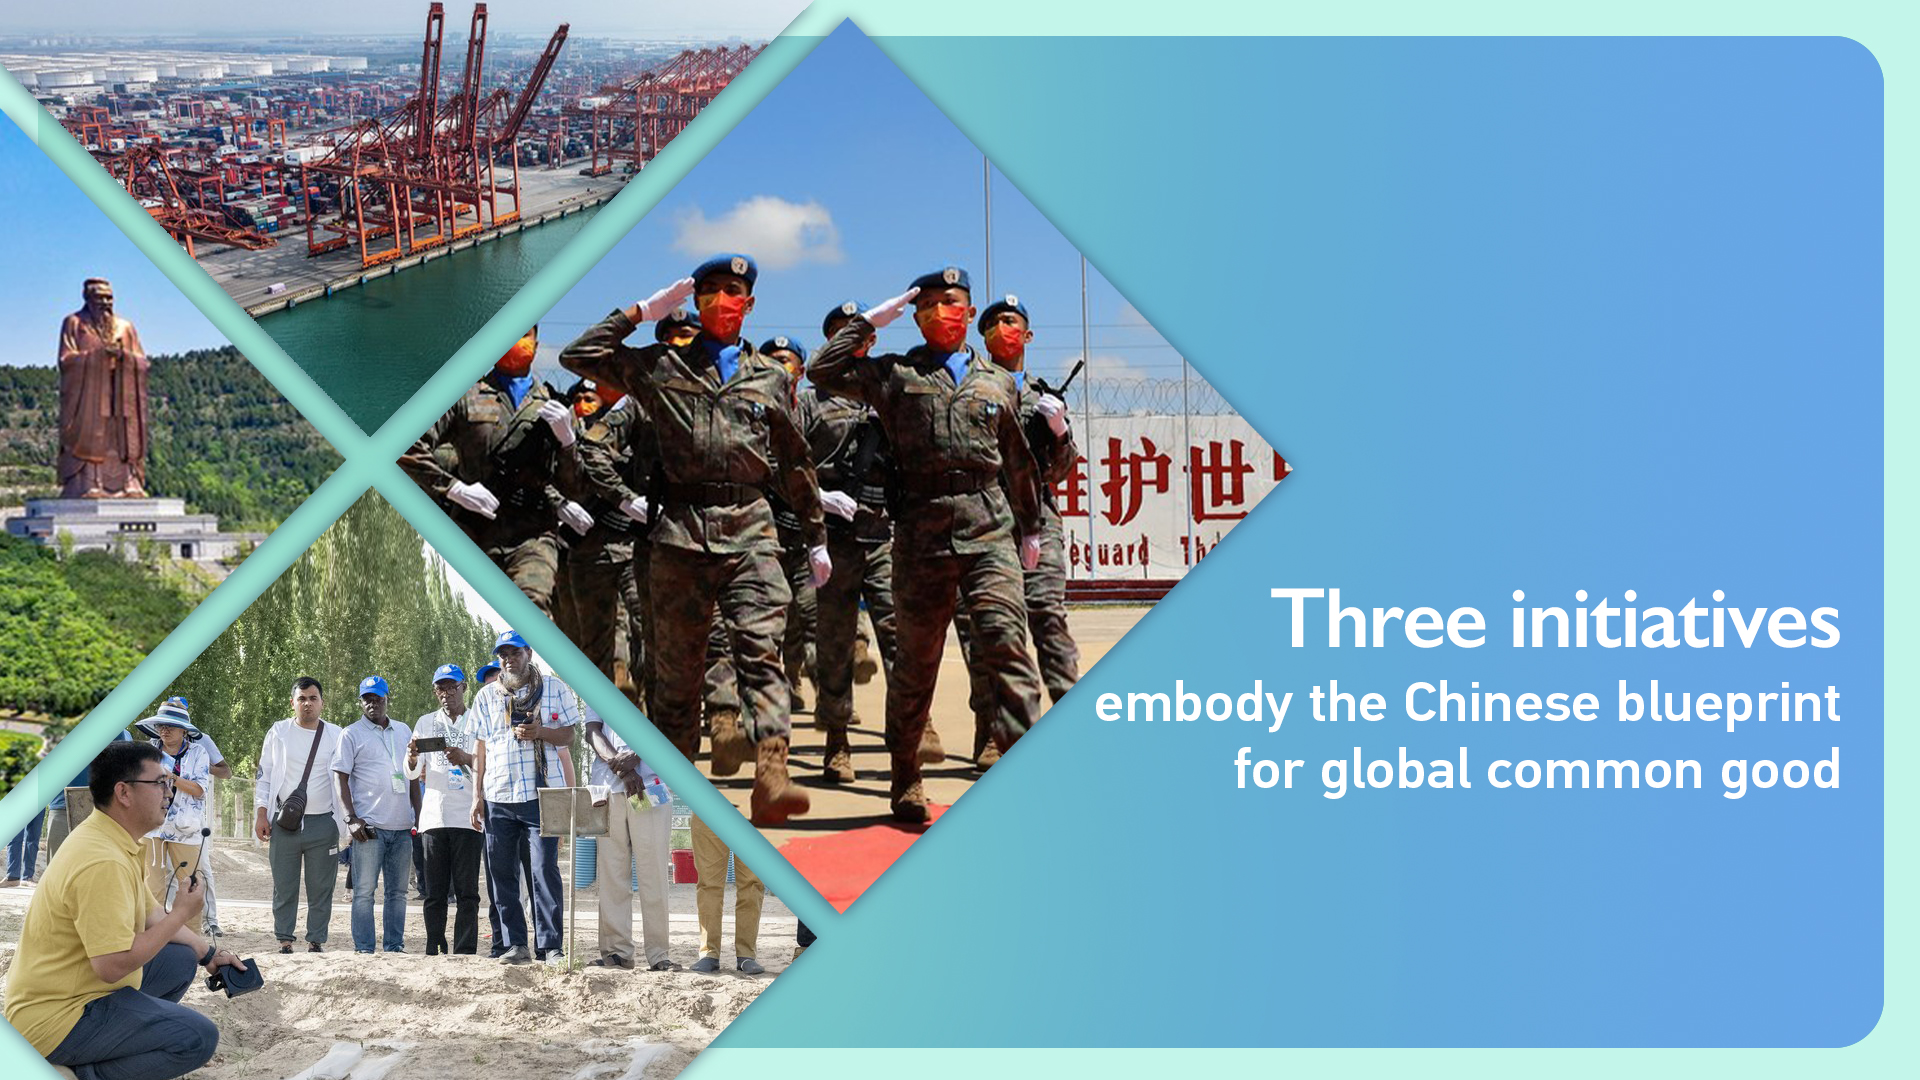 Three initiatives embody the Chinese blueprint for global common good